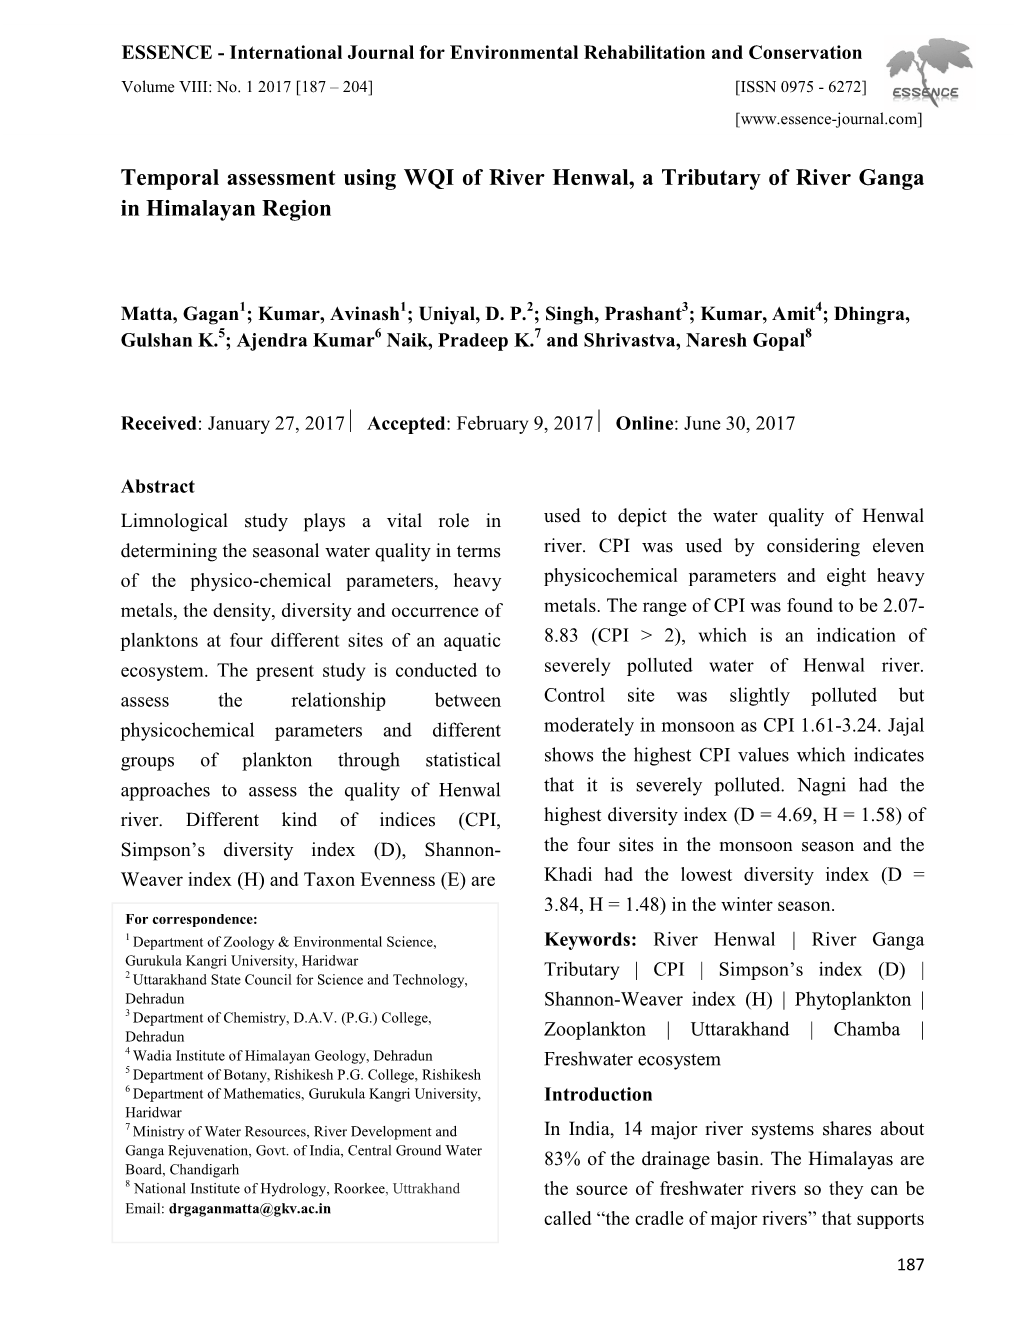 Temporal Assessment Using WQI of River Henwal, a Tributary of River Ganga in Himalayan Region